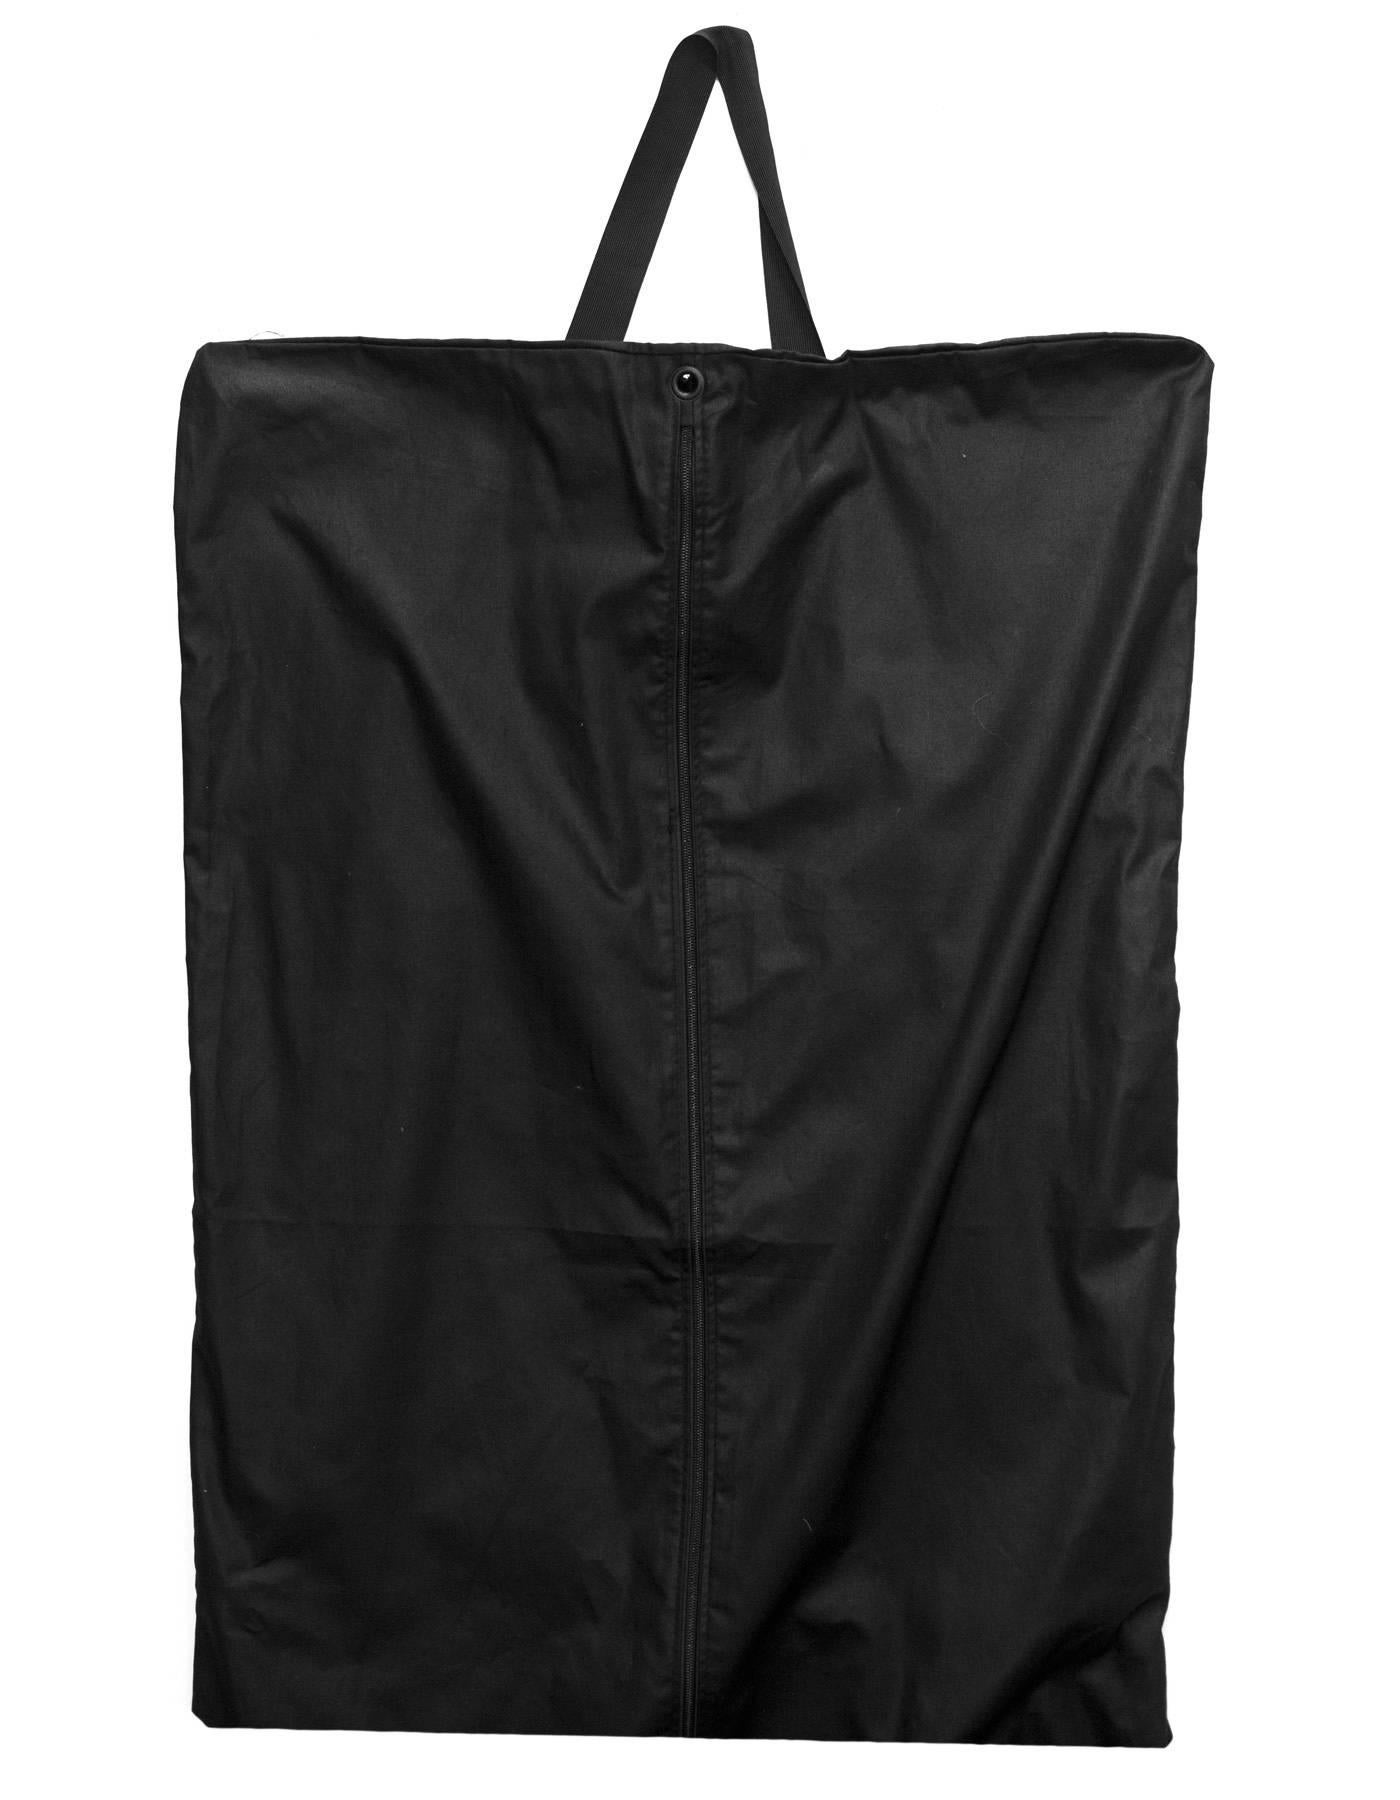 Saint Laurent Black Canvas Garment Bag & Hanger Set
Garment bag features two loops for folding and hanging 

Color: Black
Hardware: Silvertone
Materials: Canvas, plastic andmetal
Closure/Opening: Zip up center 
Overall Condition: Excellent